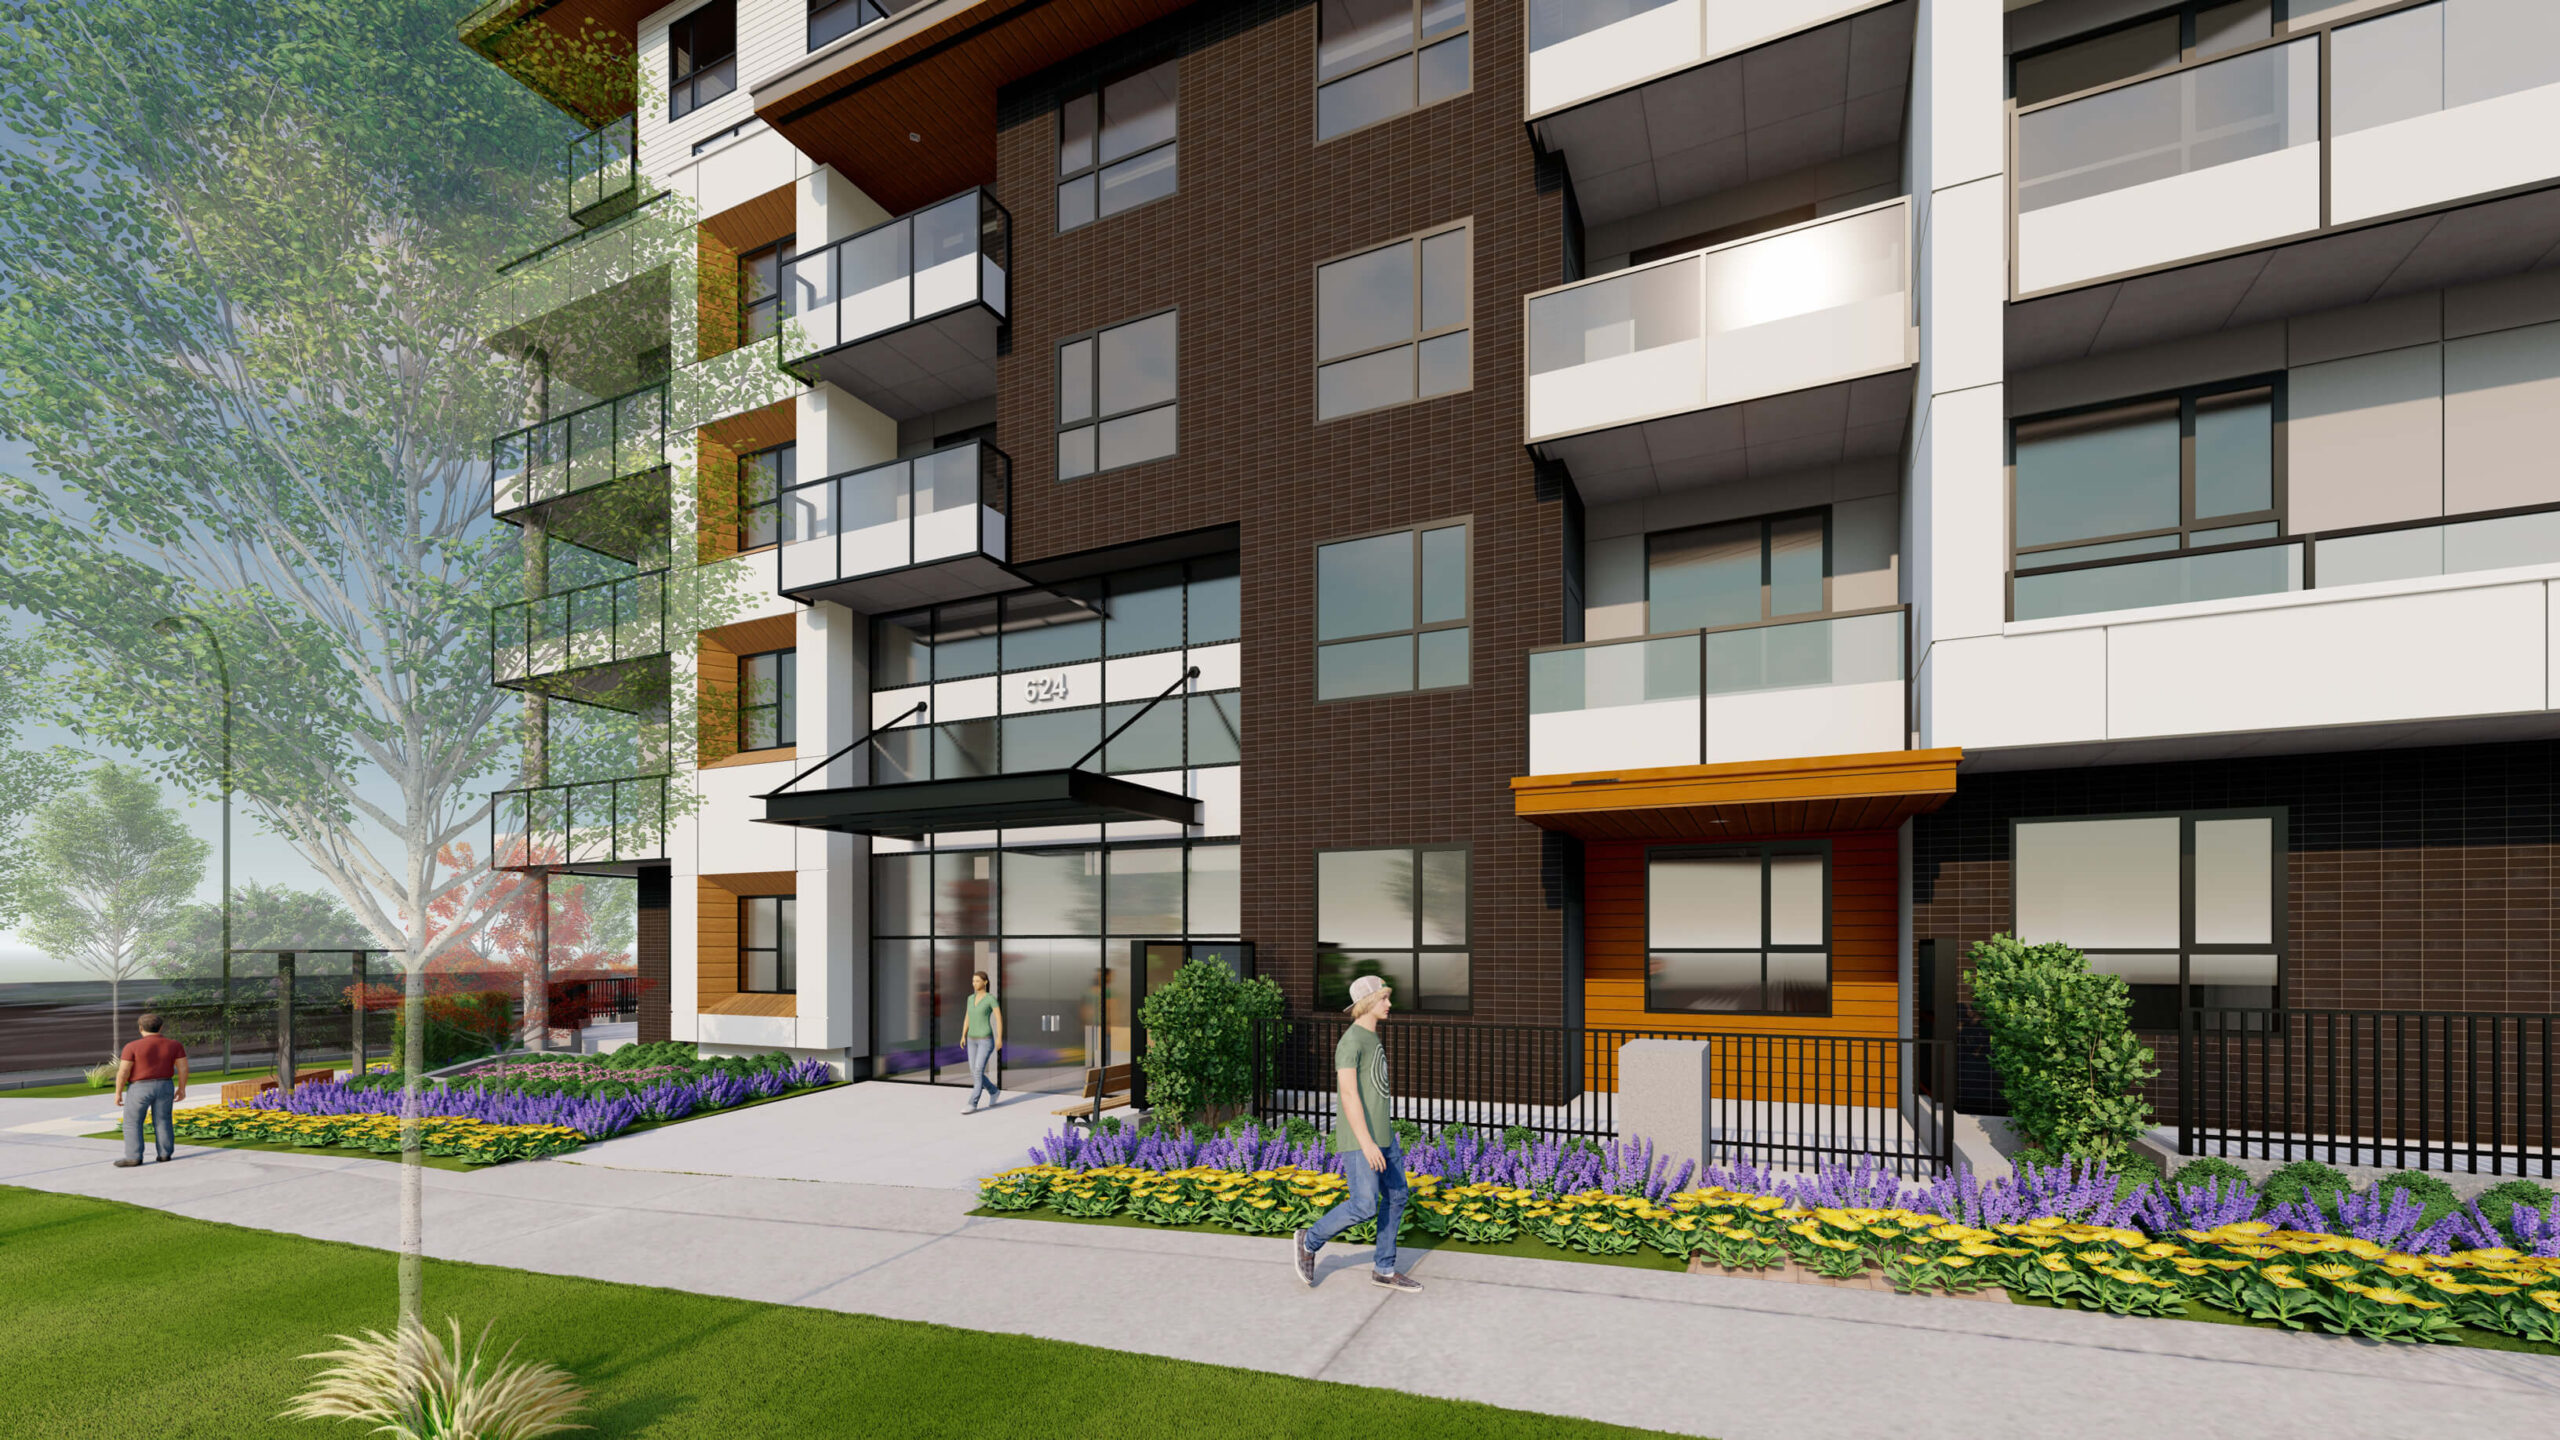 The “Aavand” development is a residential, 80-Unit condo project in Coquitlam. Design by Group 161 | DF Architecture.